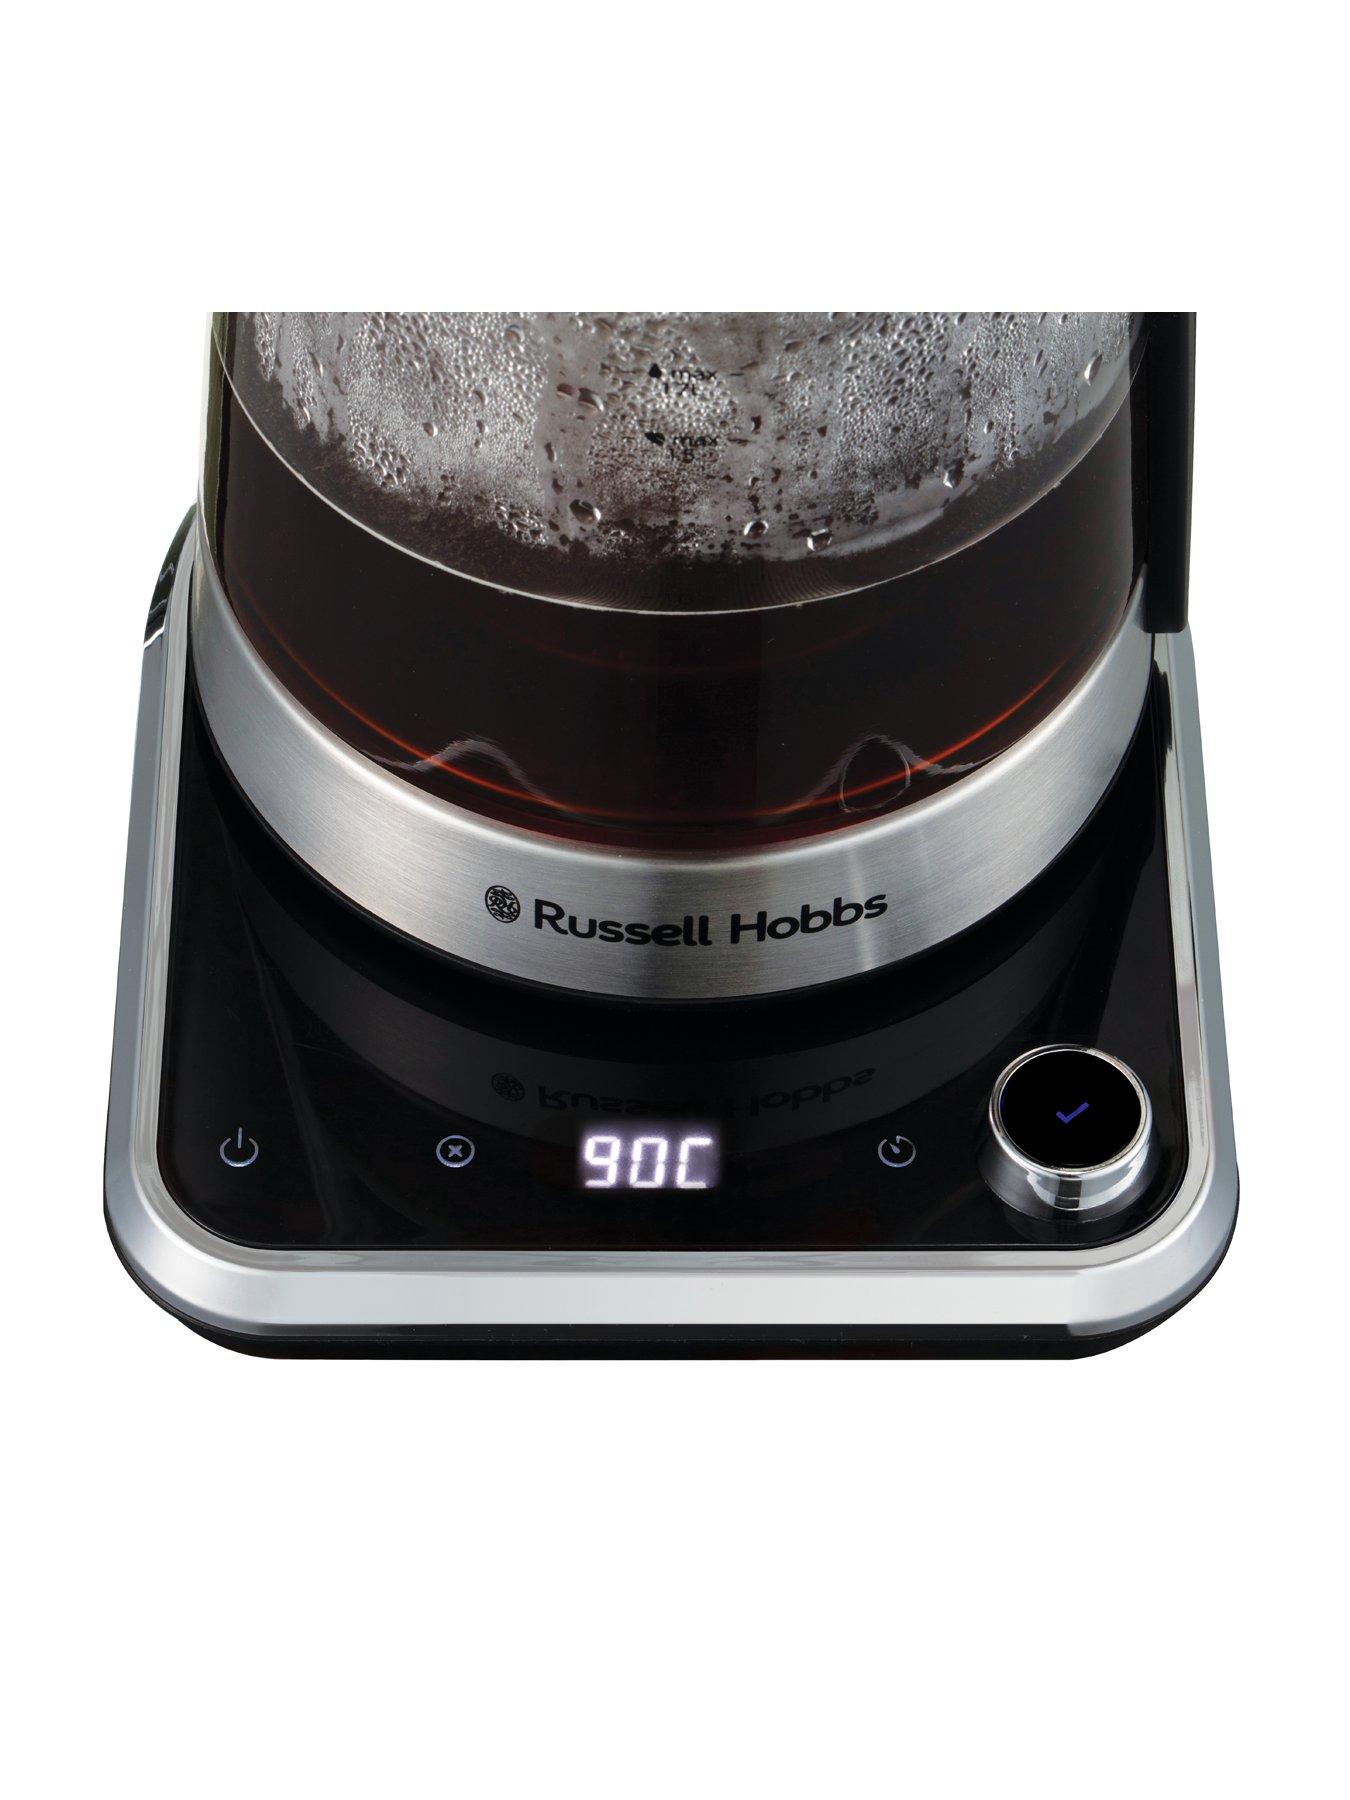 Attentiv Variable Temperature Kettle 26200 by Russell Hobbs